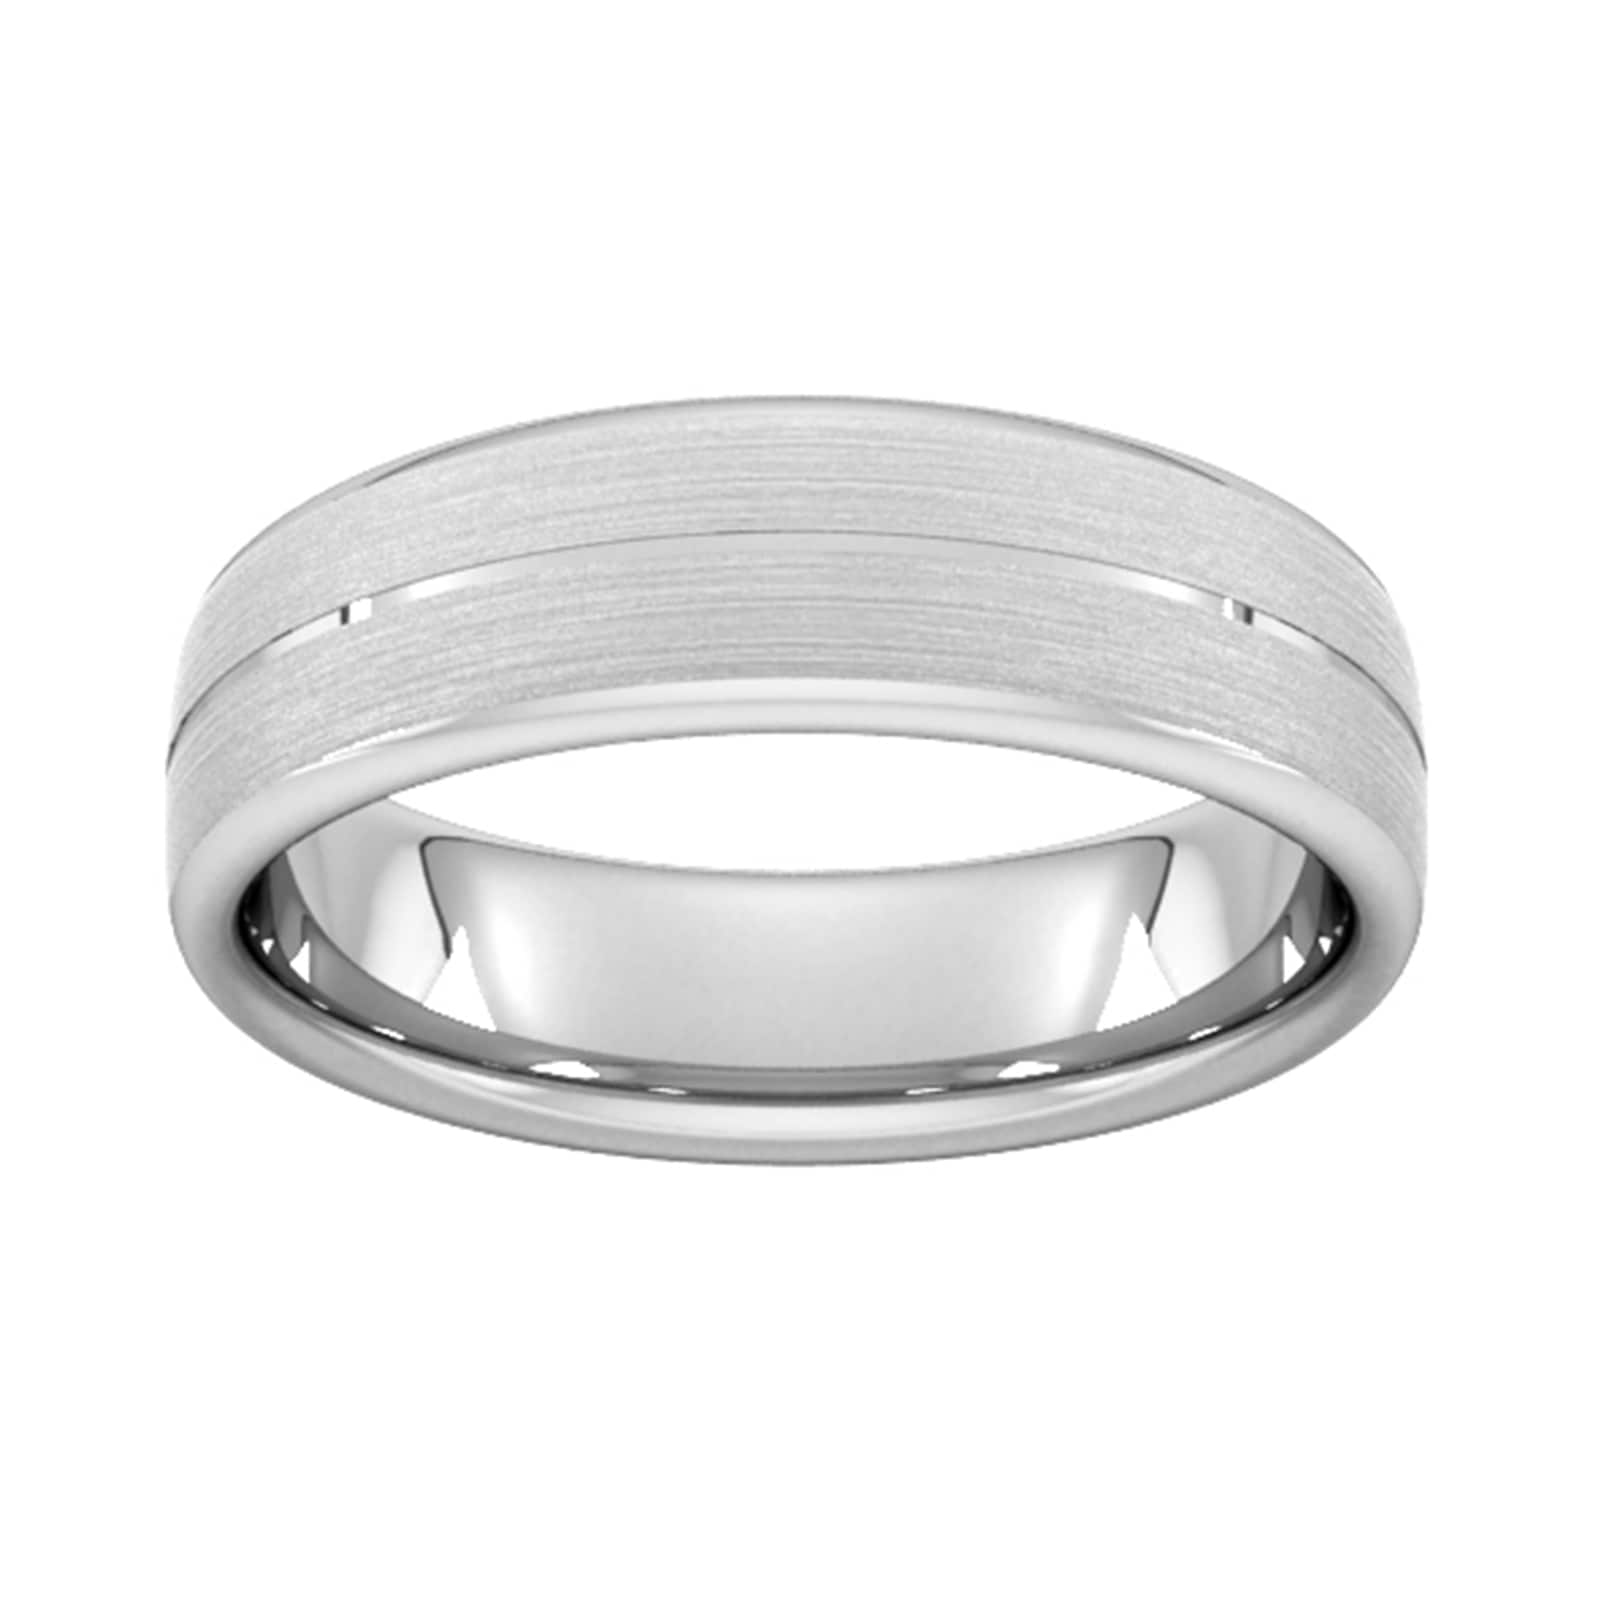 6mm D Shape Standard Centre Groove With Chamfered Edge Wedding Ring In 950 Palladium - Ring Size O